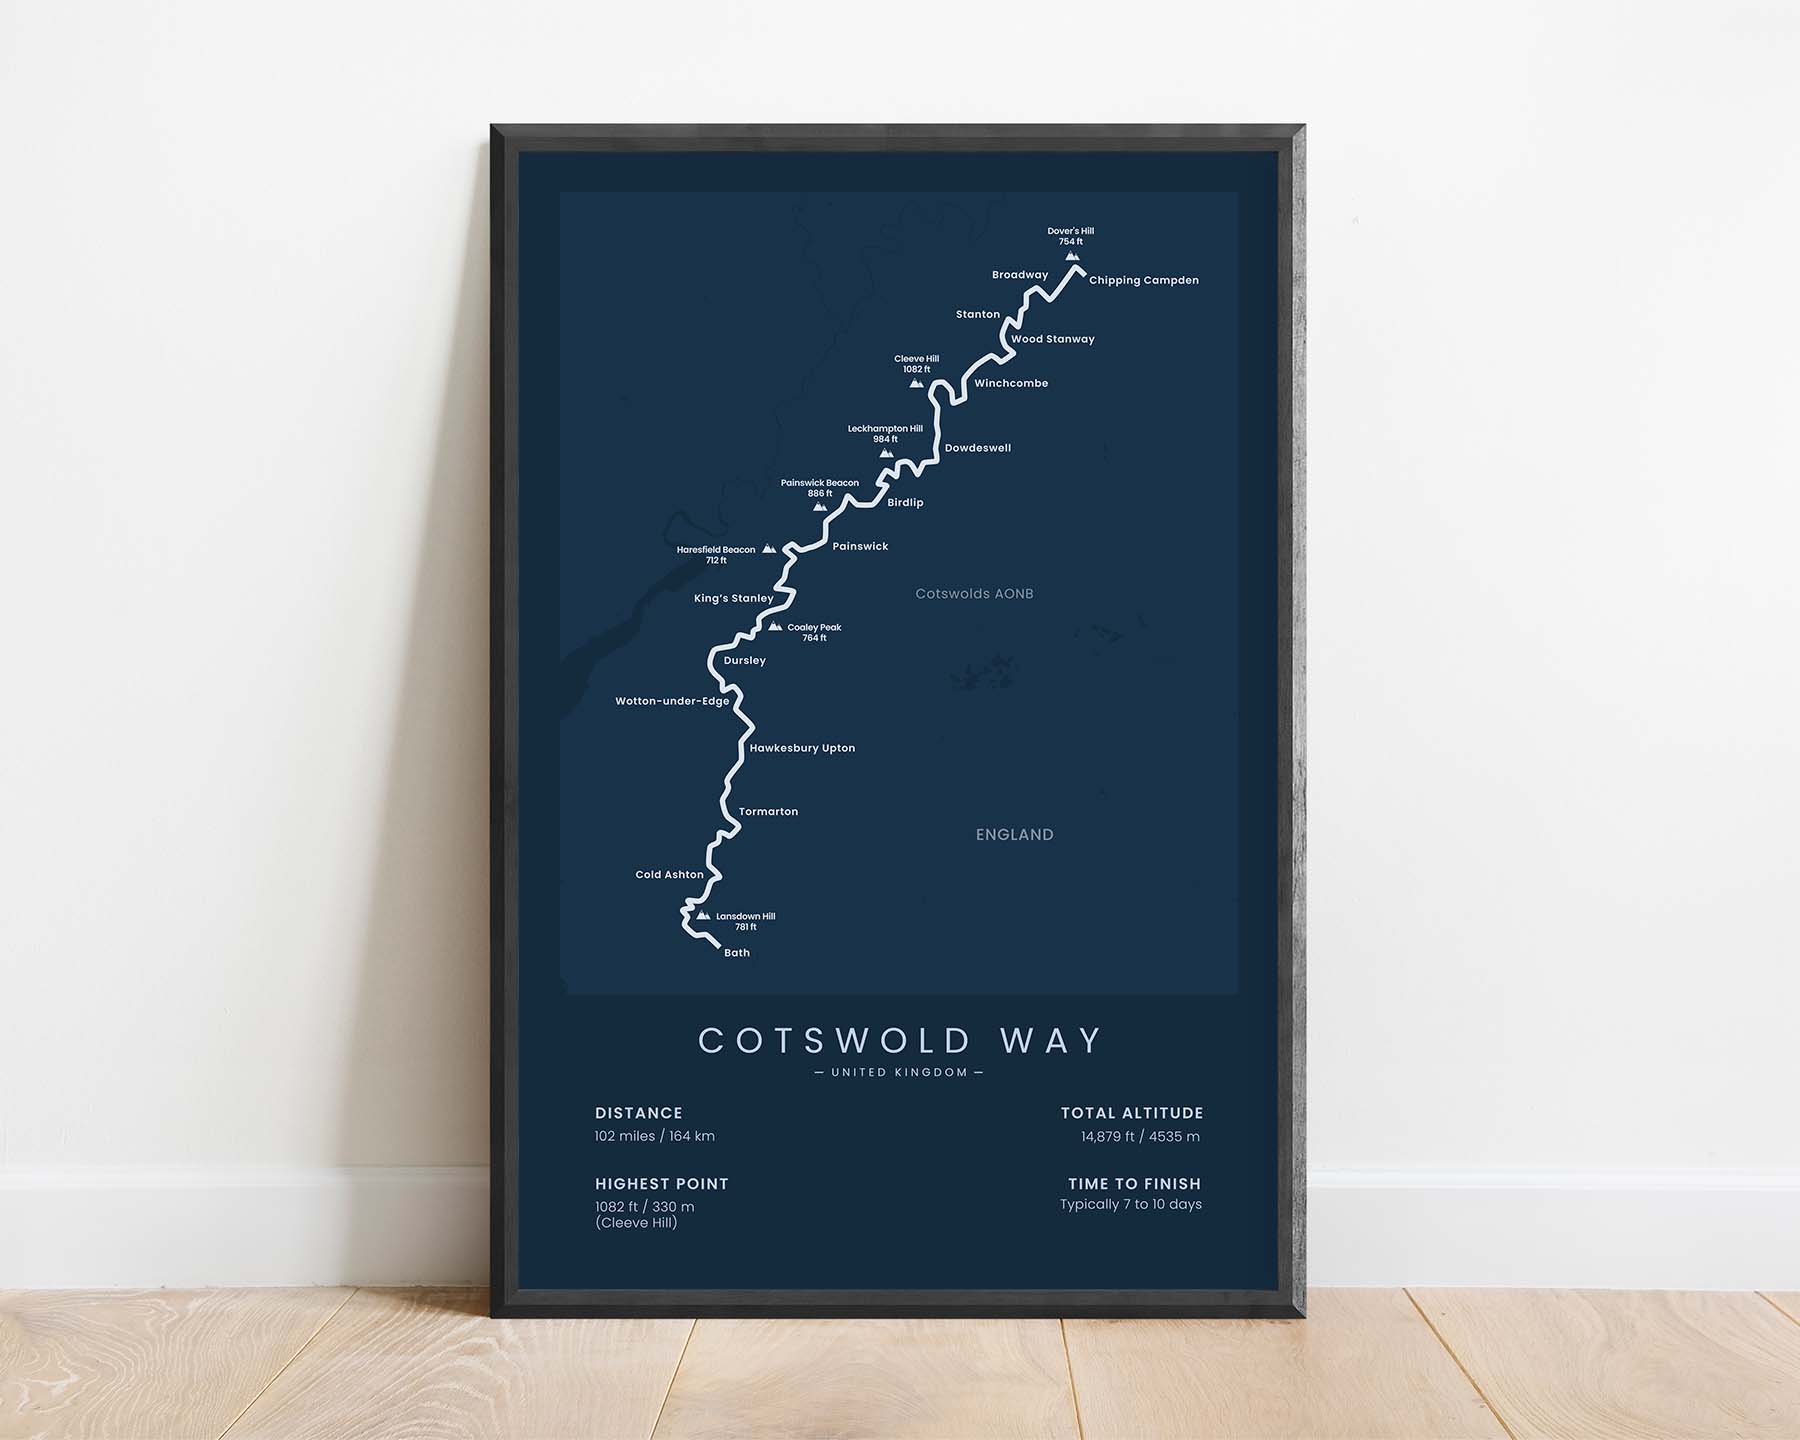 Cotswold Way (Chipping Campden to Bath, England, Cotswolds AONB, United Kingdom) Path Print with Blue Background